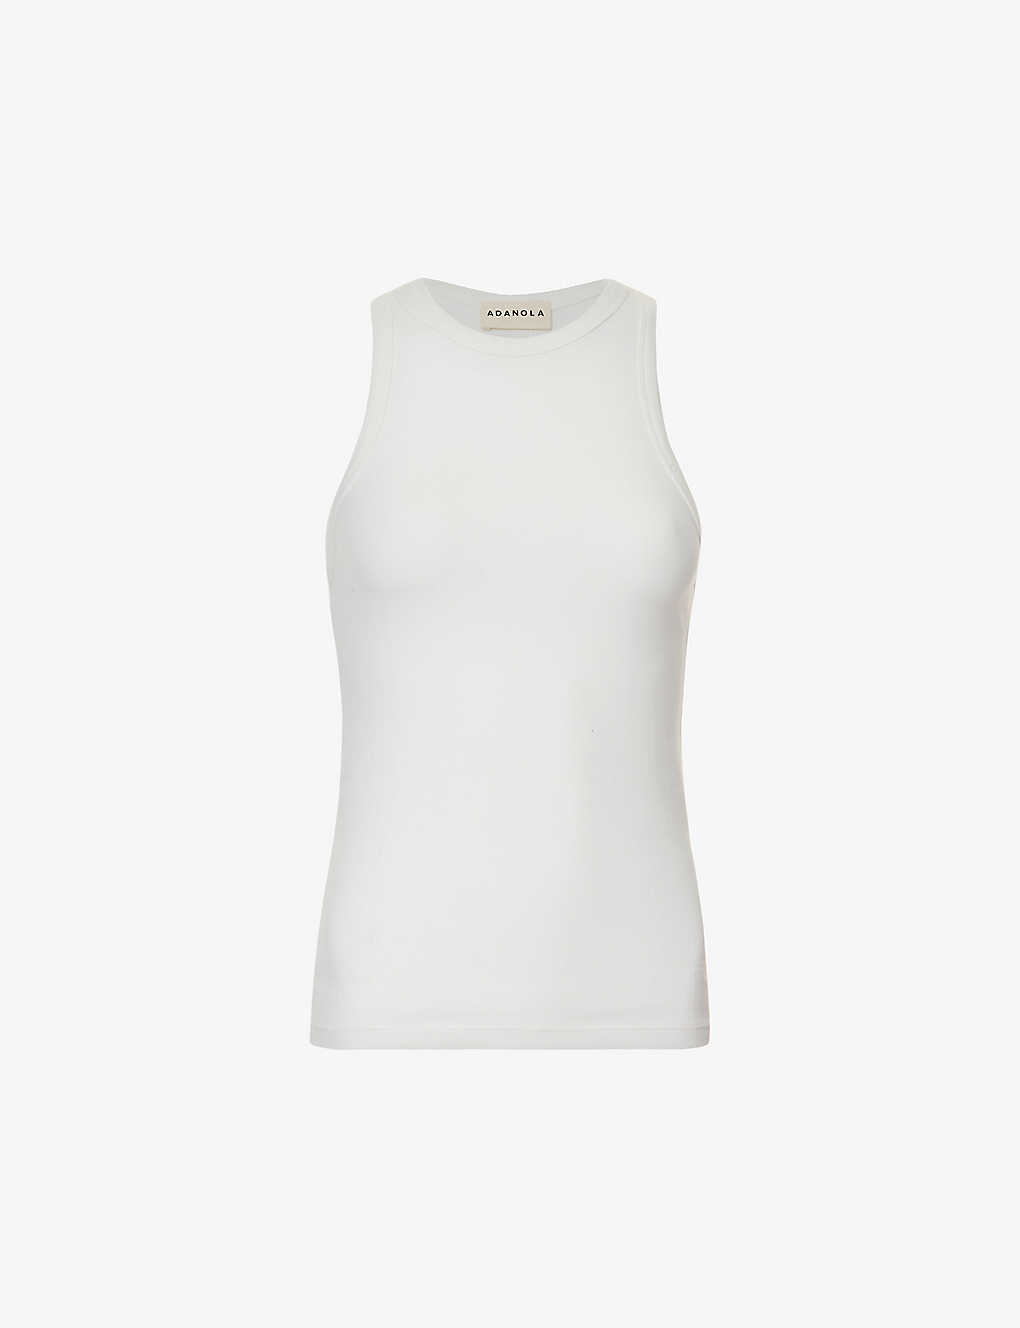 Adanola Womens White Scoop-neck Fitted Stretch-cotton Top